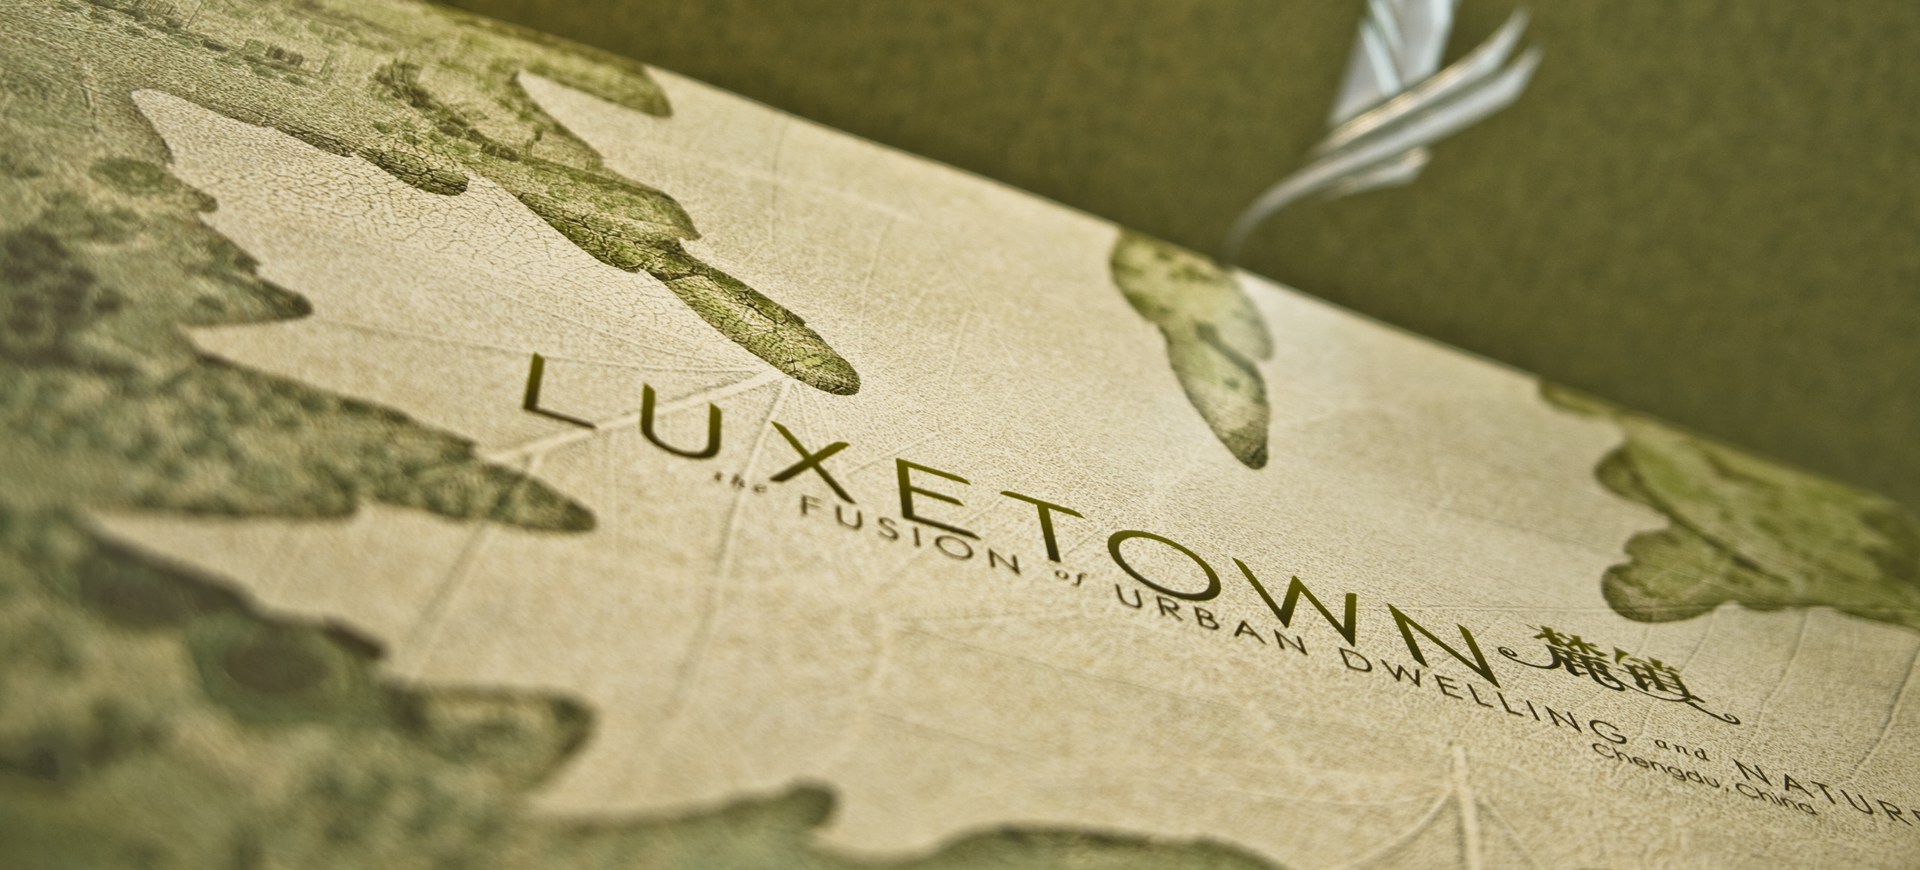 02_graphics_luxetown_large